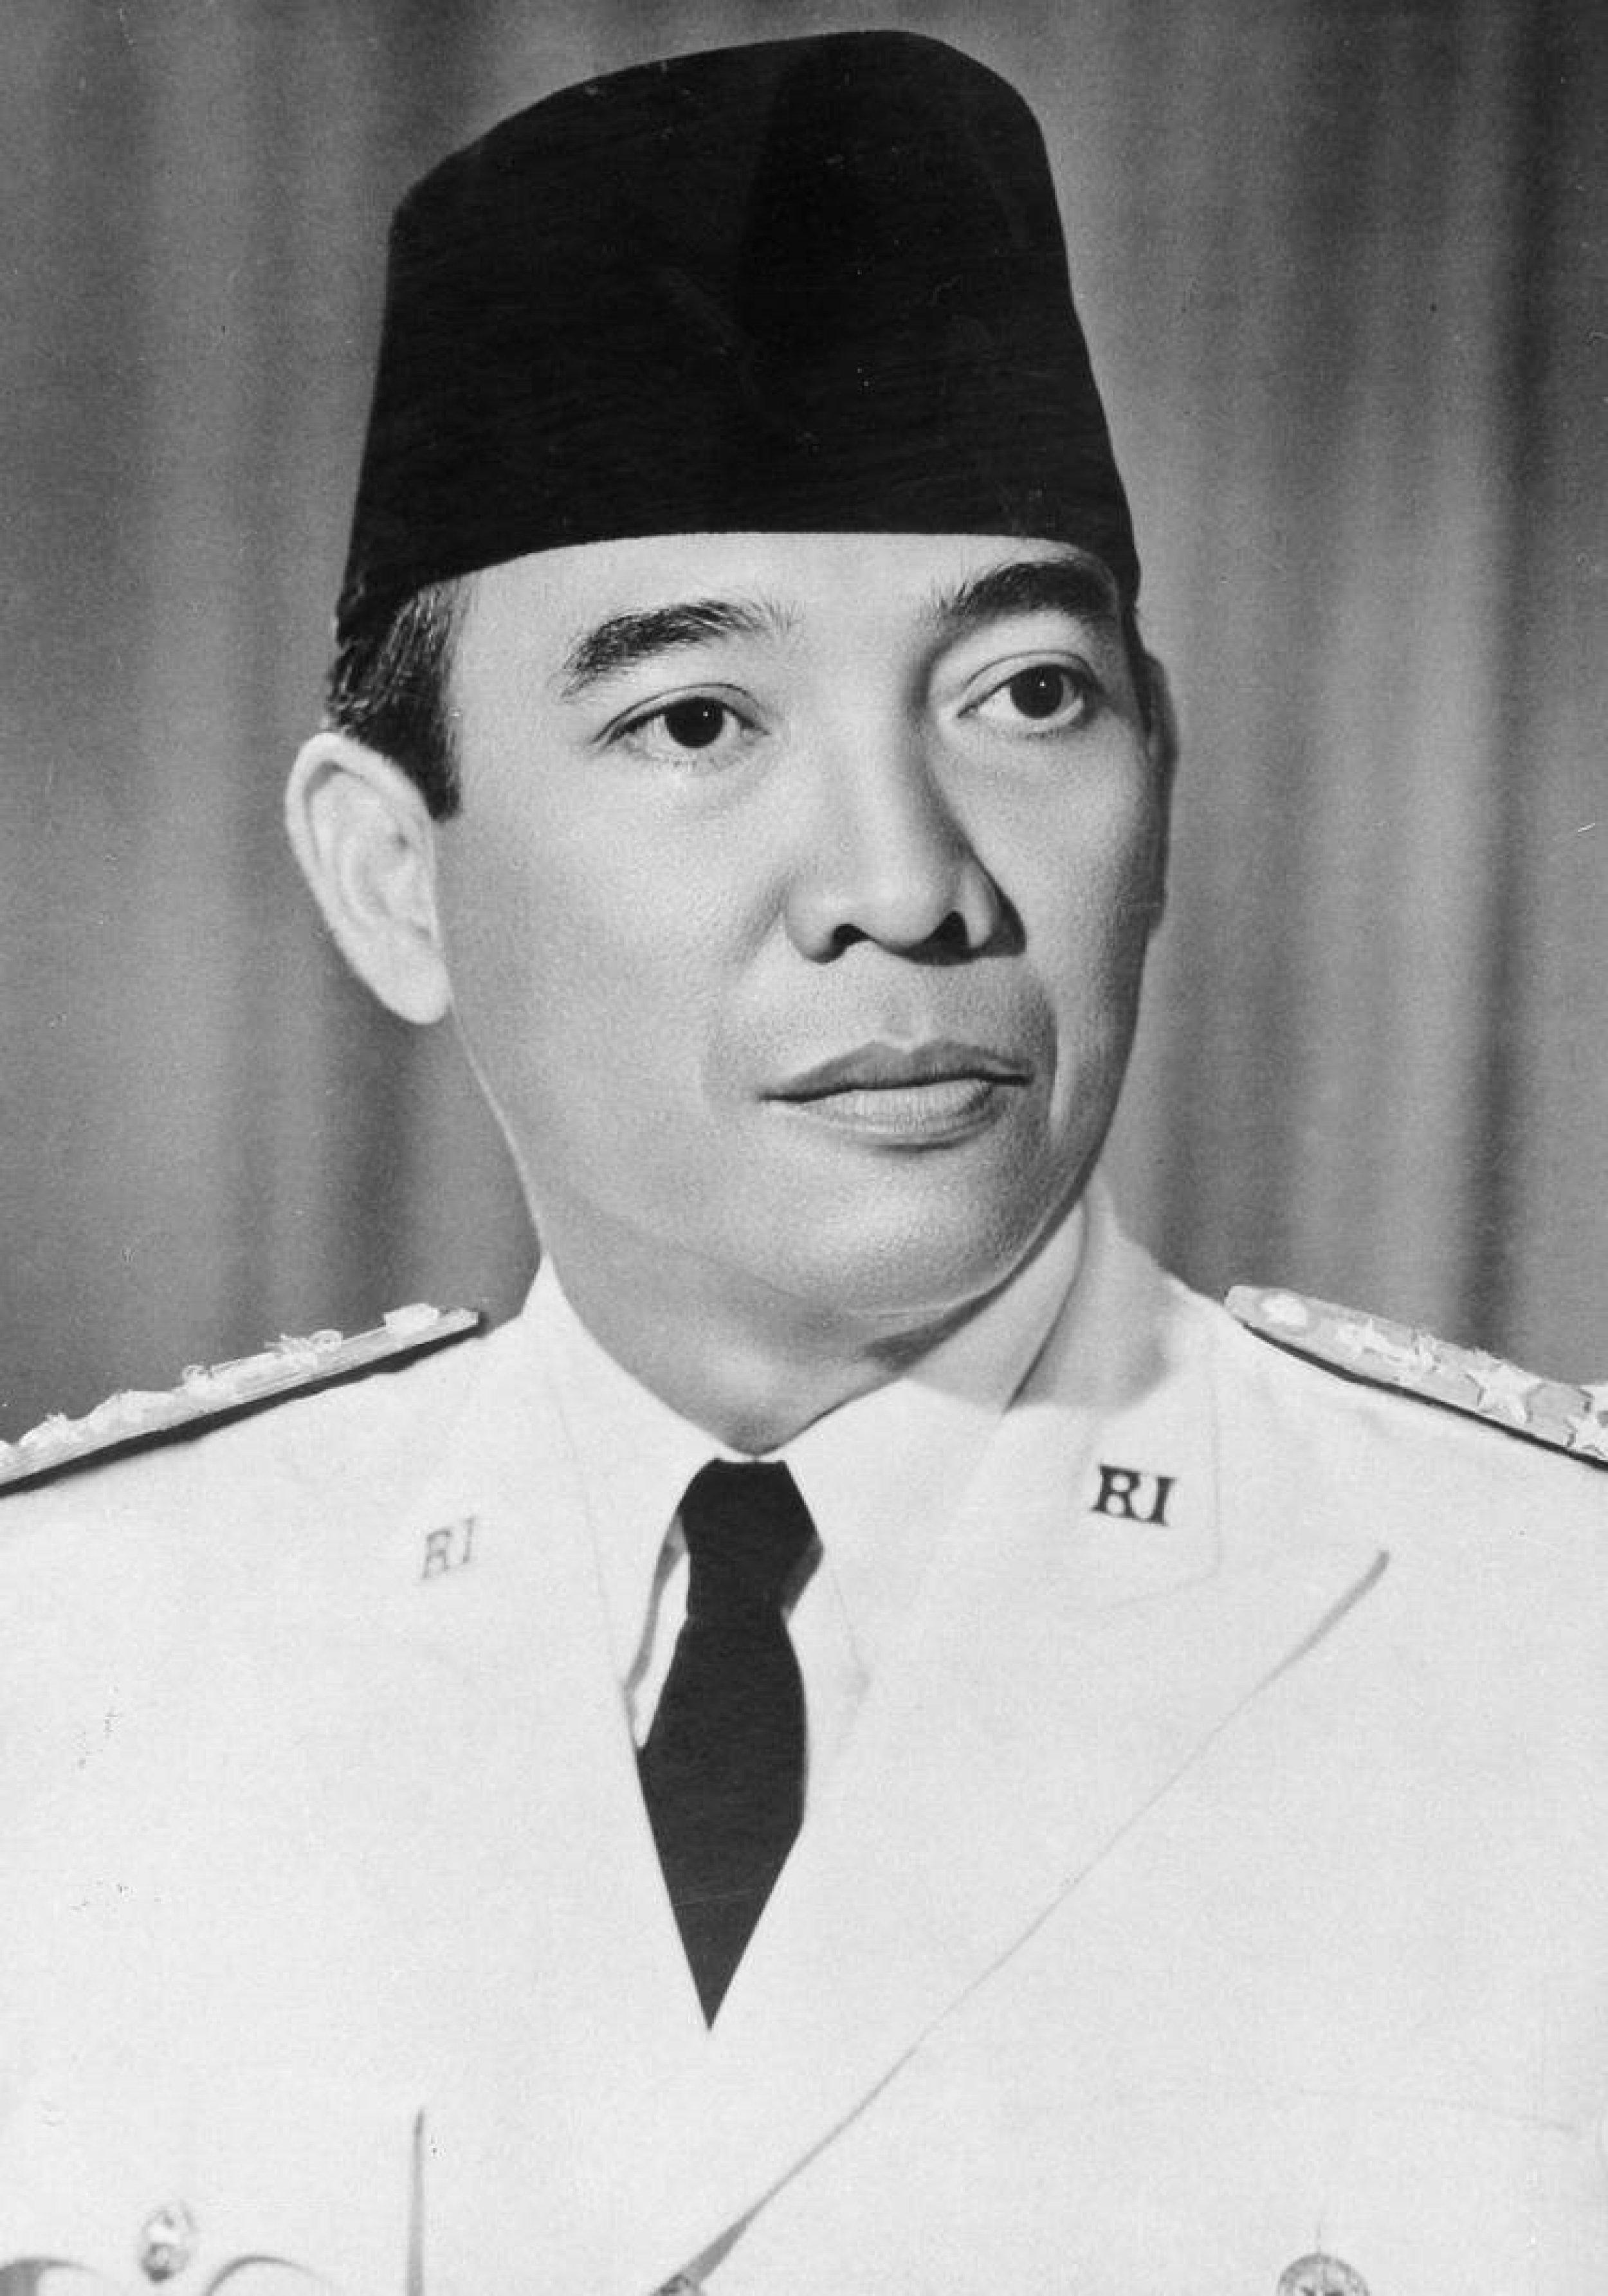 Sukarno, Suharto, Megawati Why Do Some Indonesians Have Only One Name